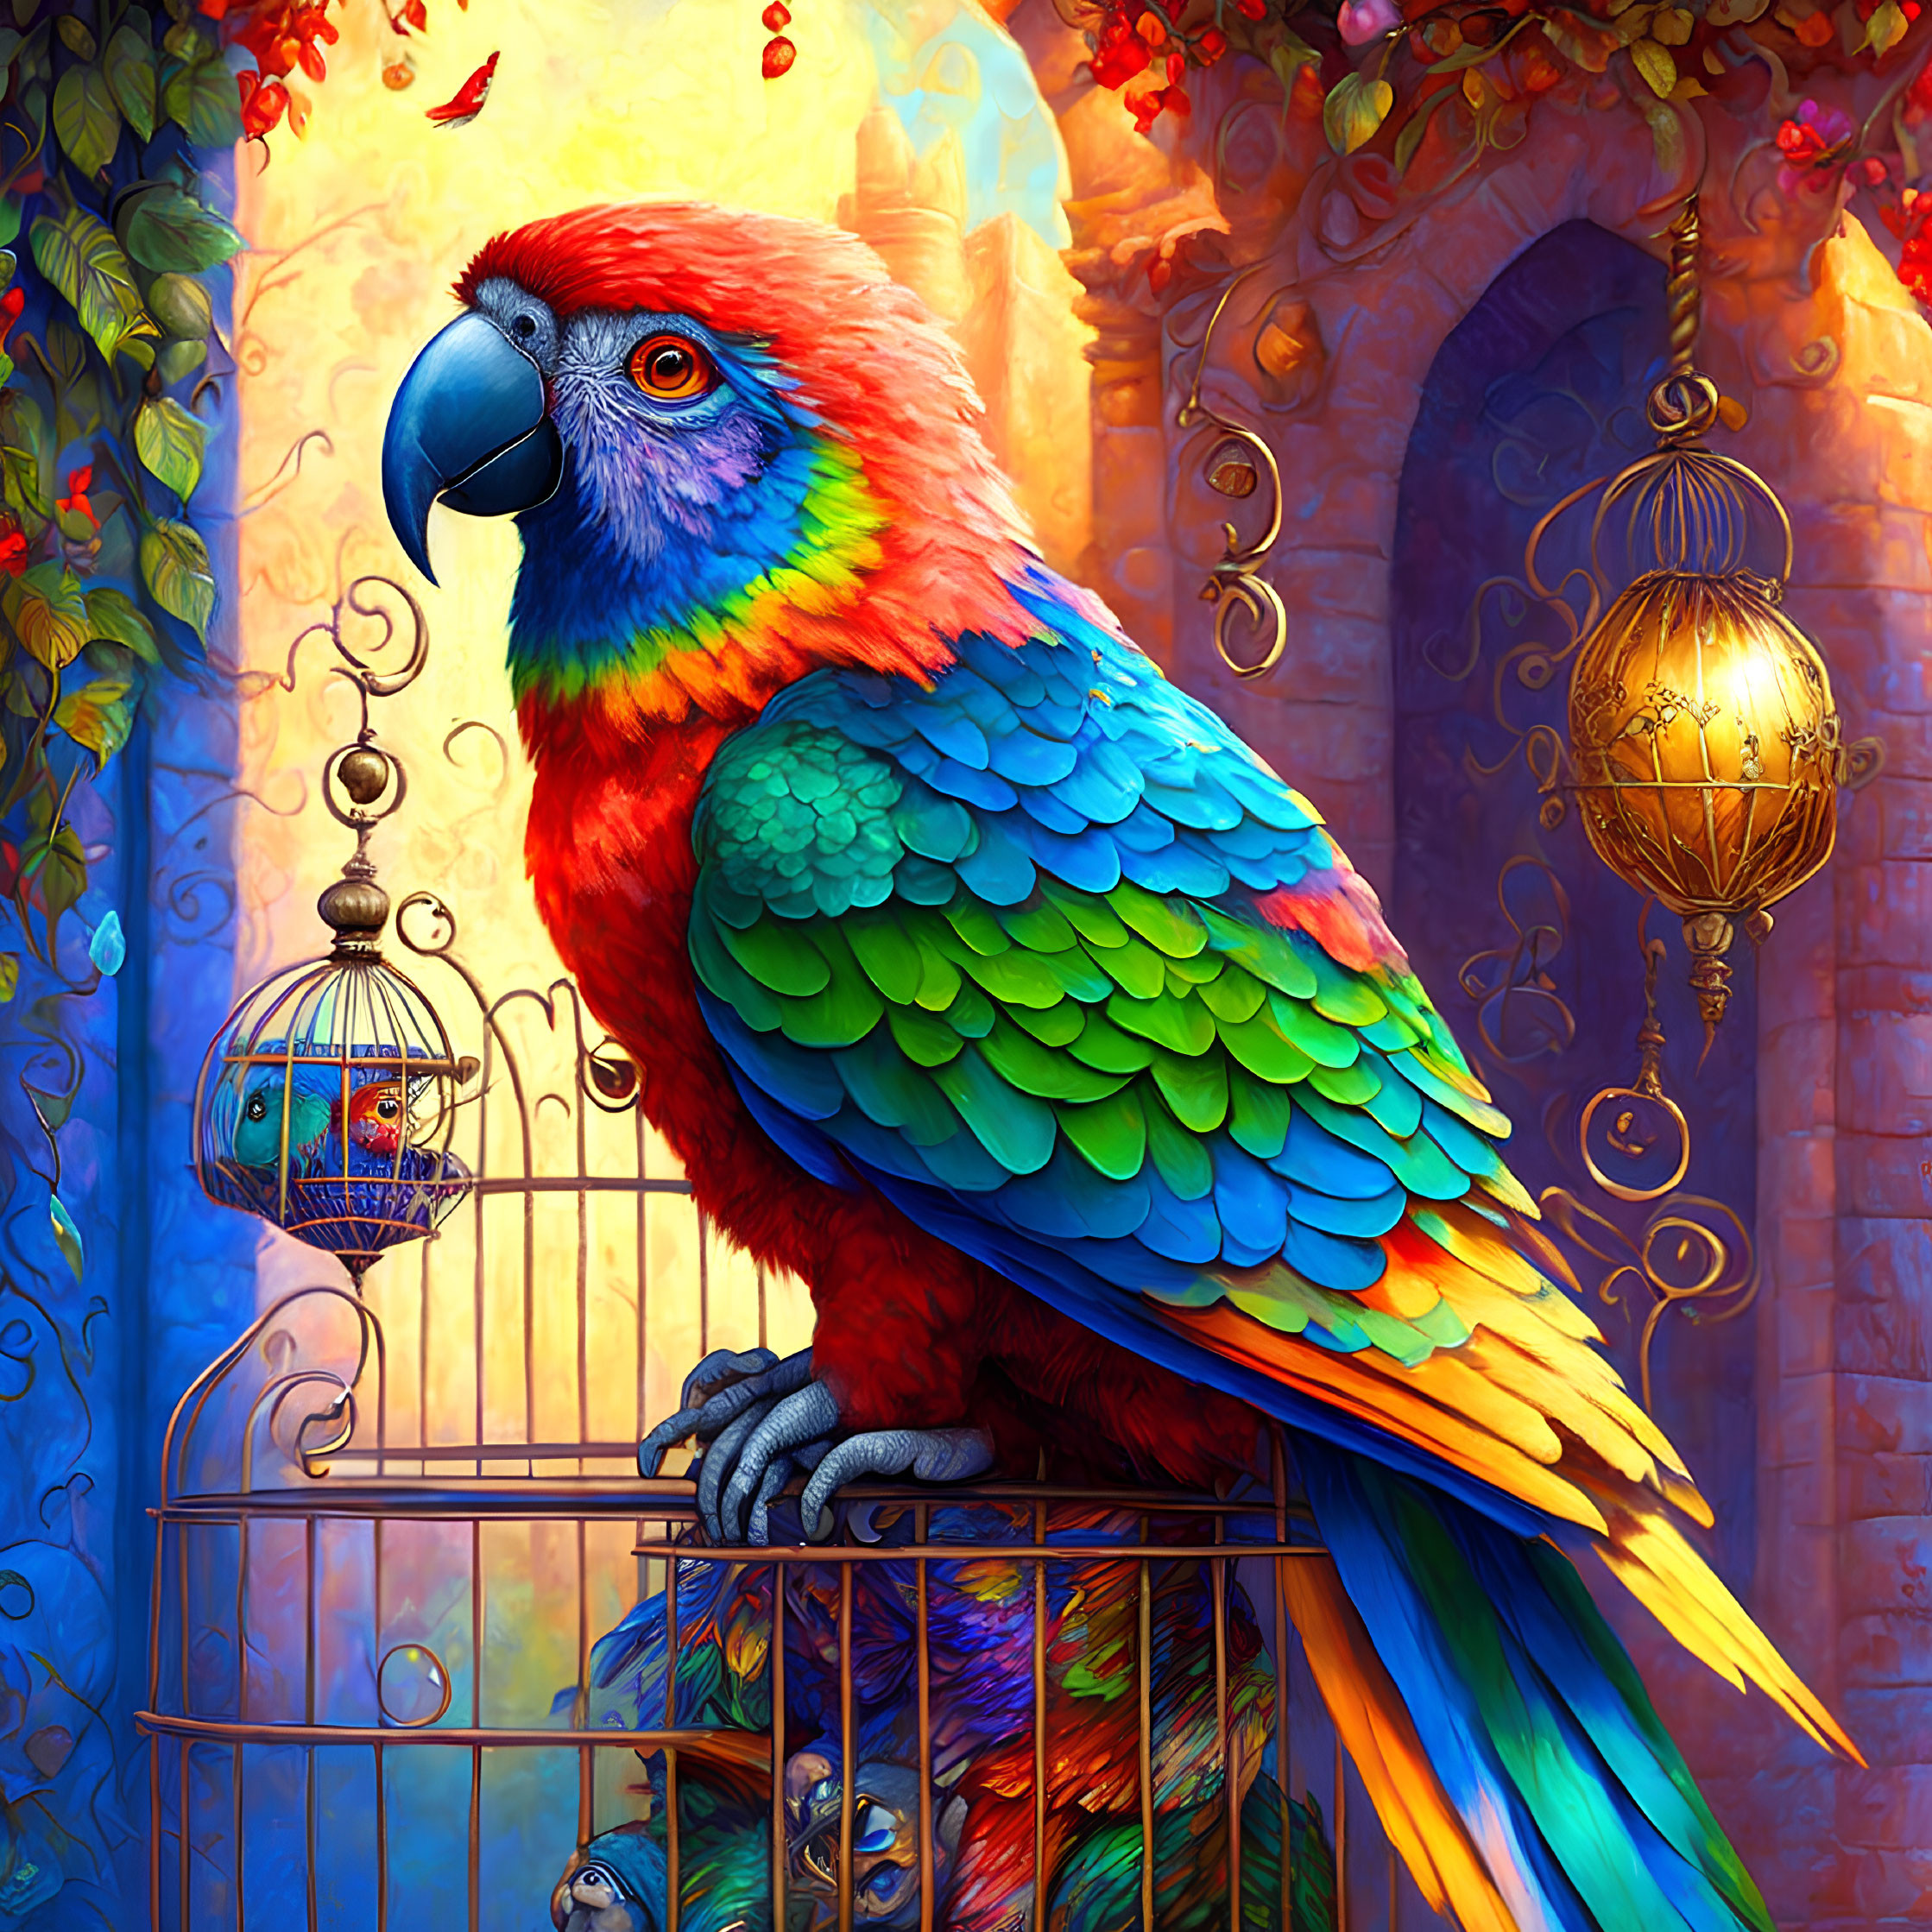 Colorful Parrot Perched on Open Cage with Whimsical Background